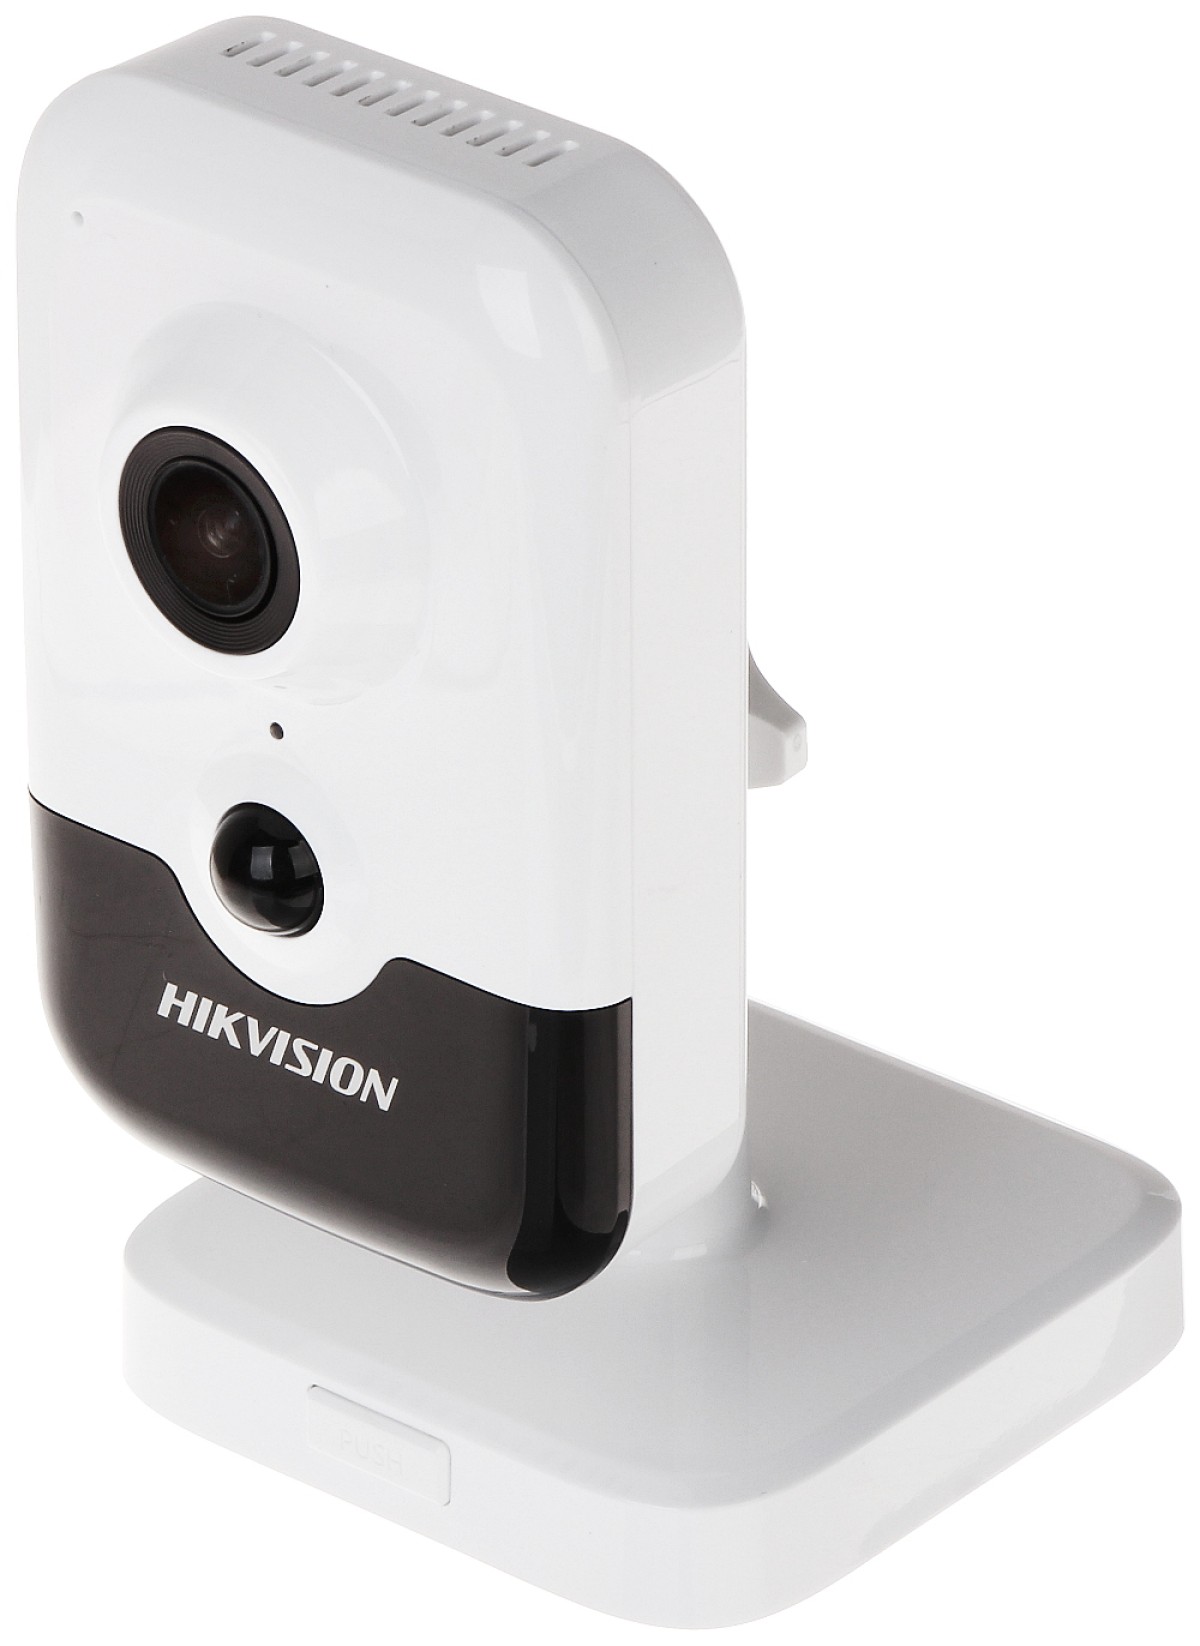 IP-камера Hikvision DS-2CD2425FWD-I (2.8) 98_134.jpg - фото 1